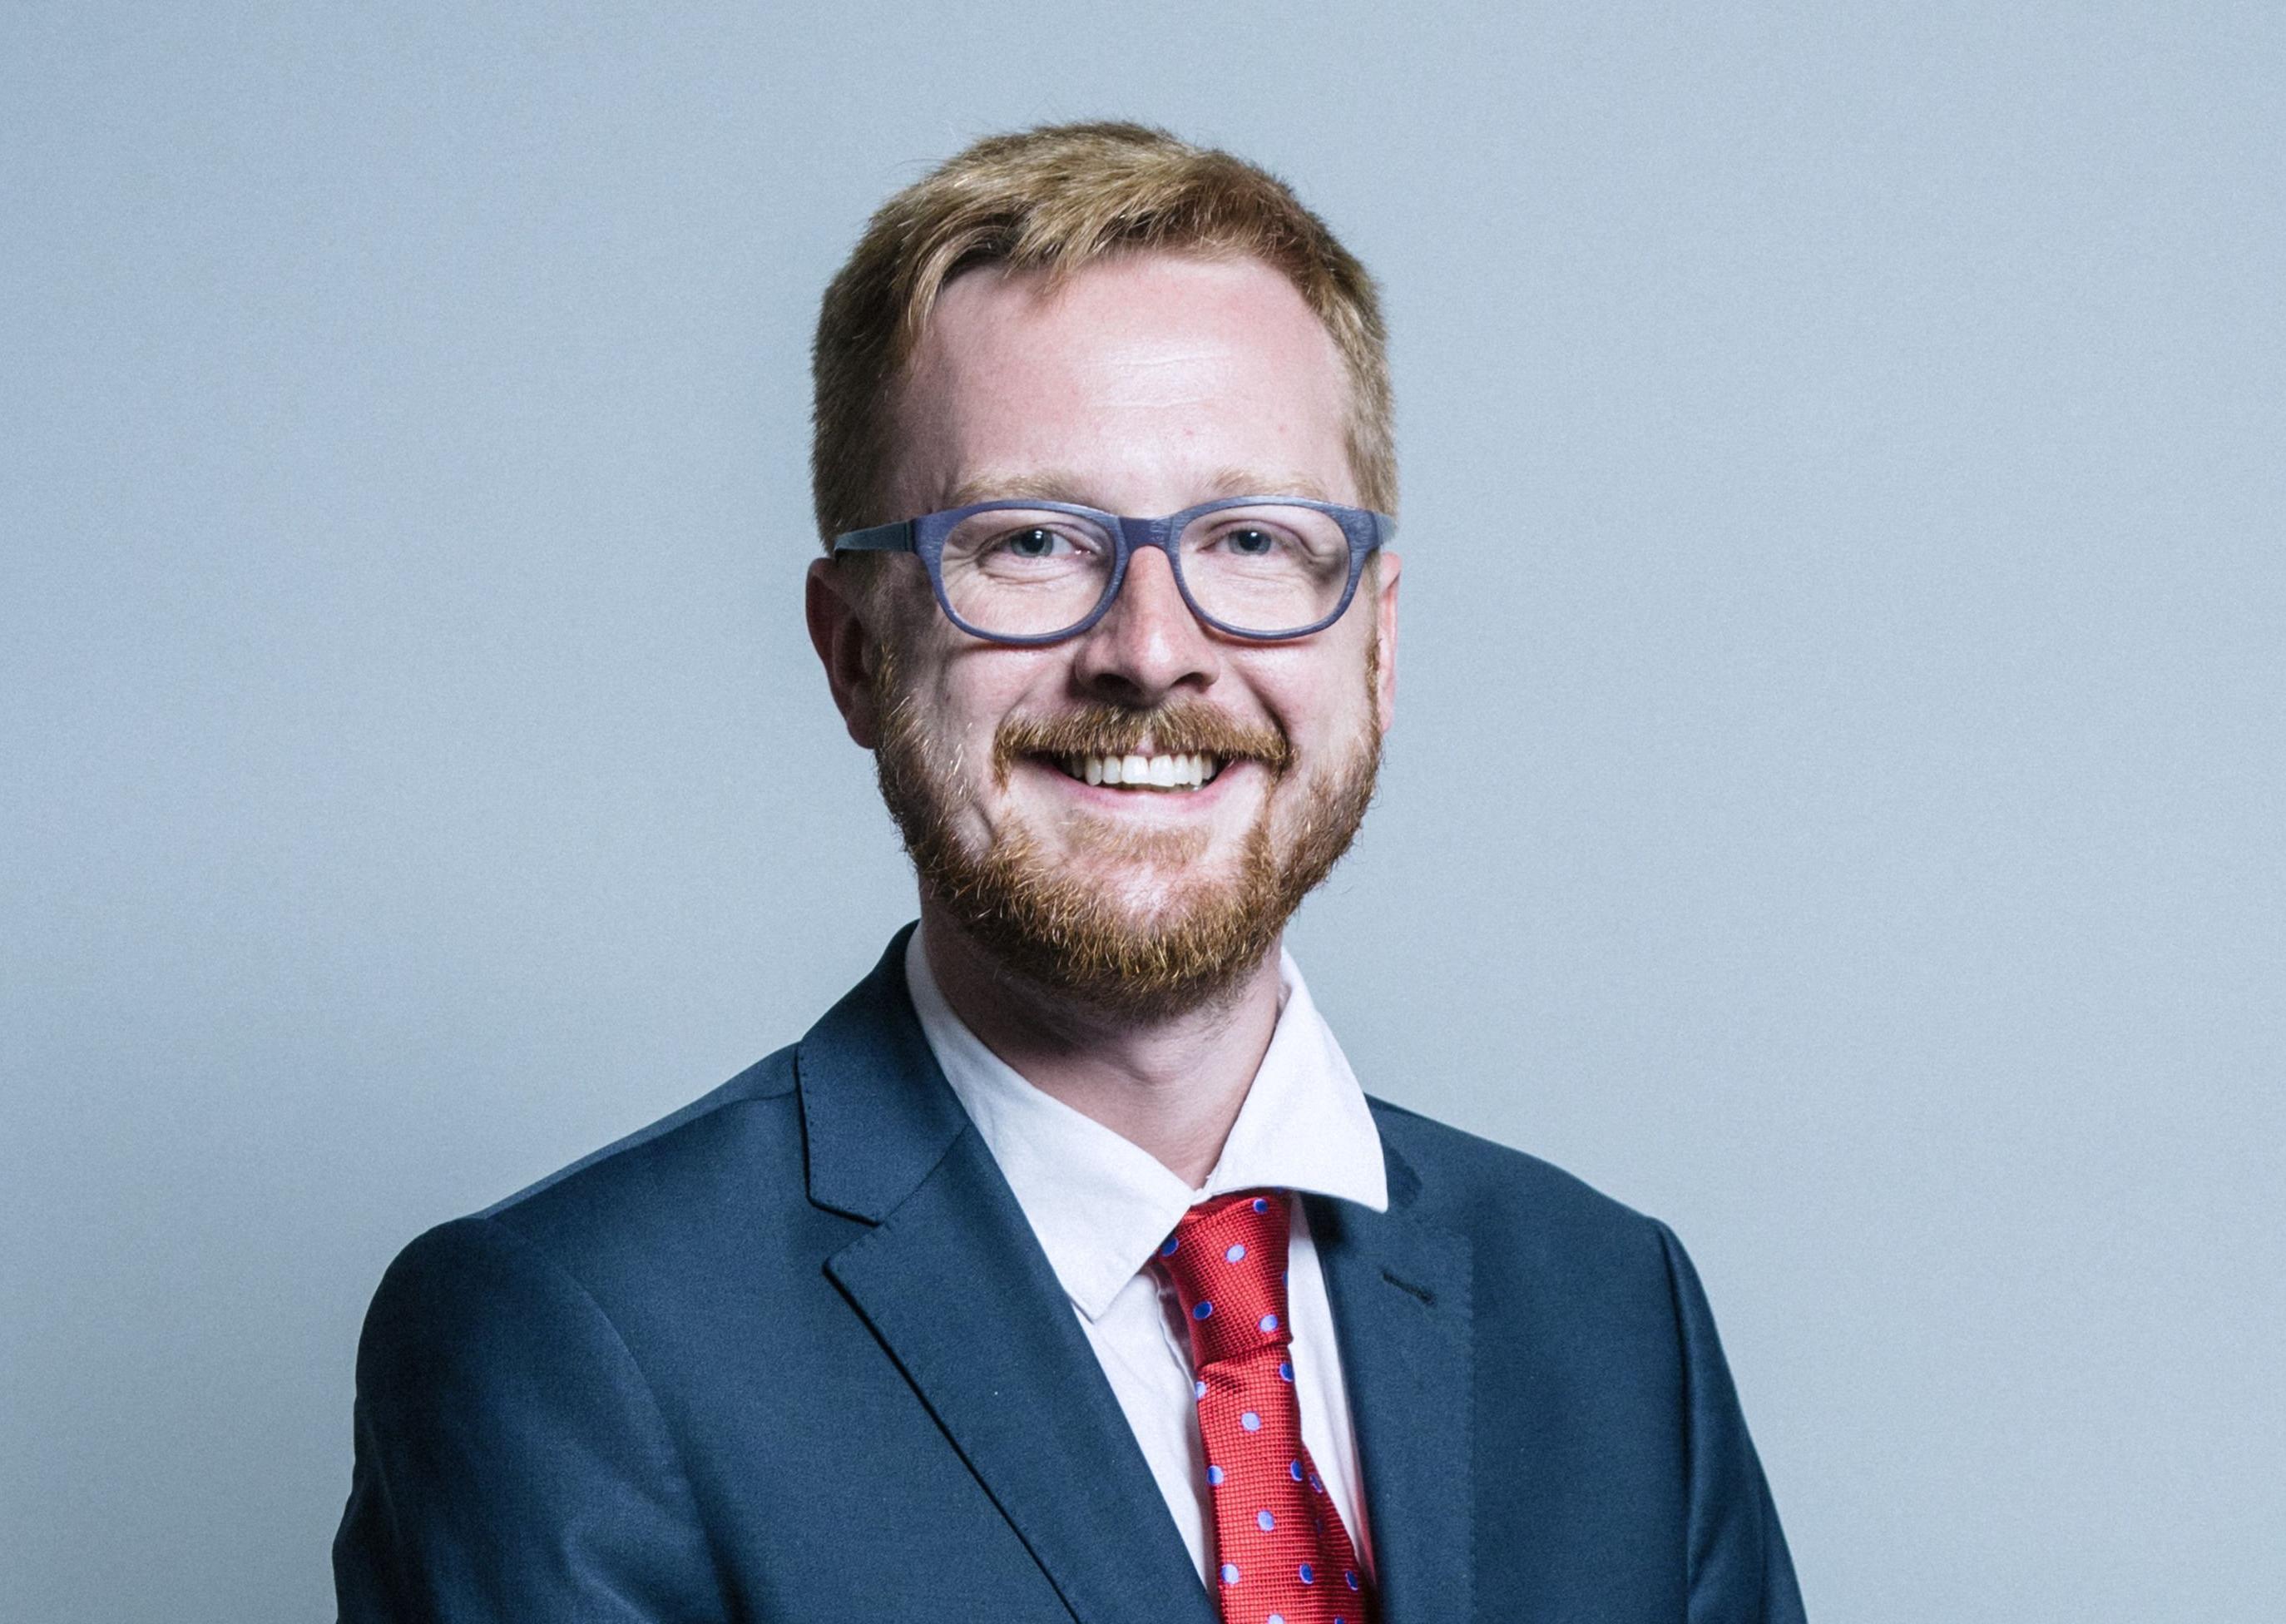 Lloyd Russell-Moyle has been elected Labour MP for Brighton Kemptown again